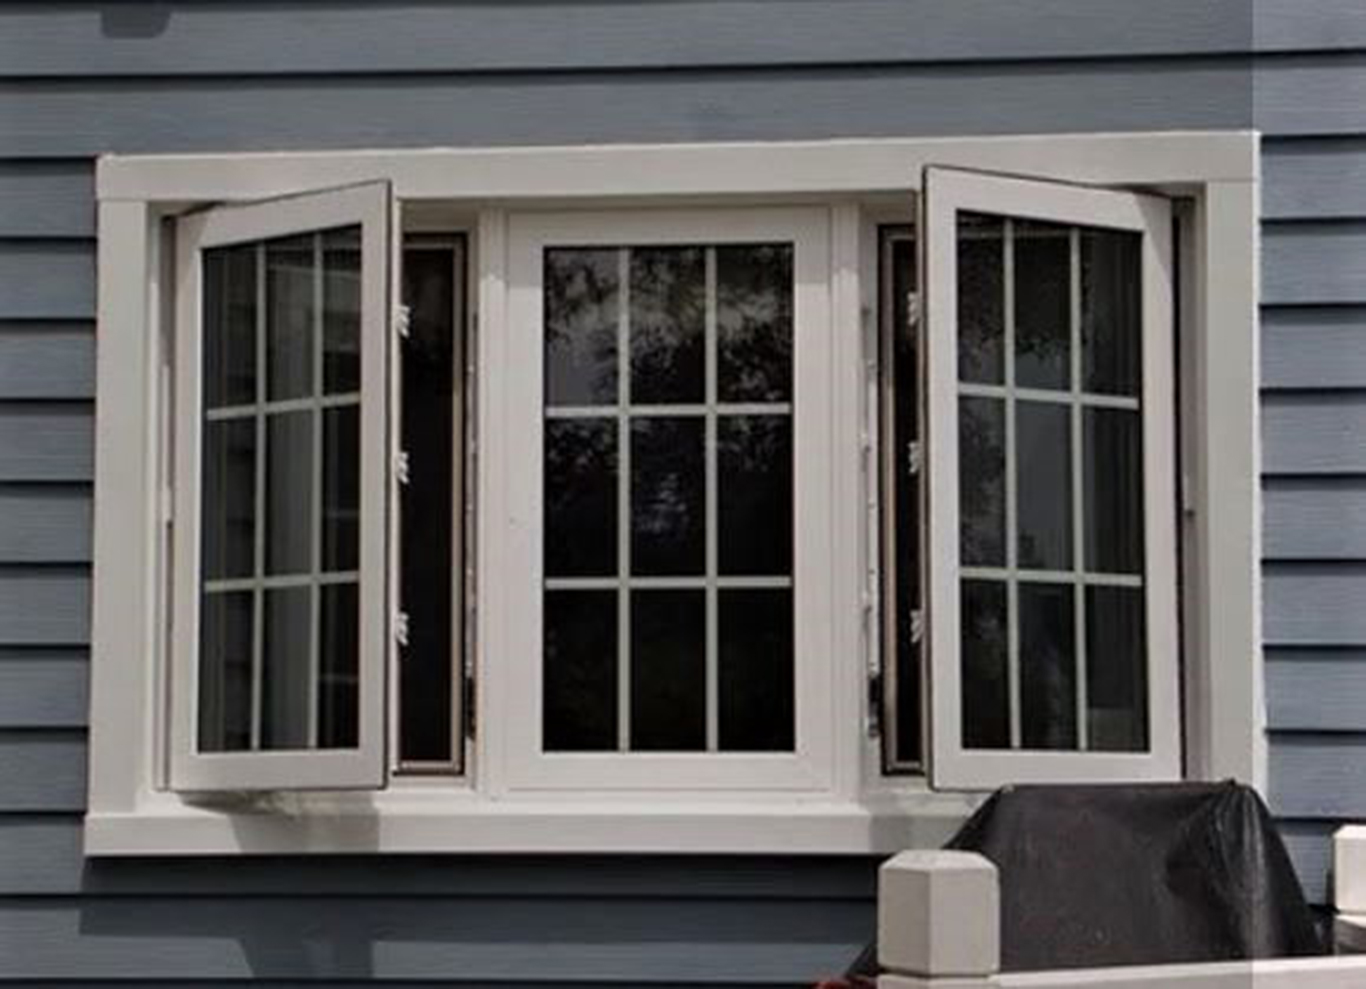 Black tinted glass with white casement windows.